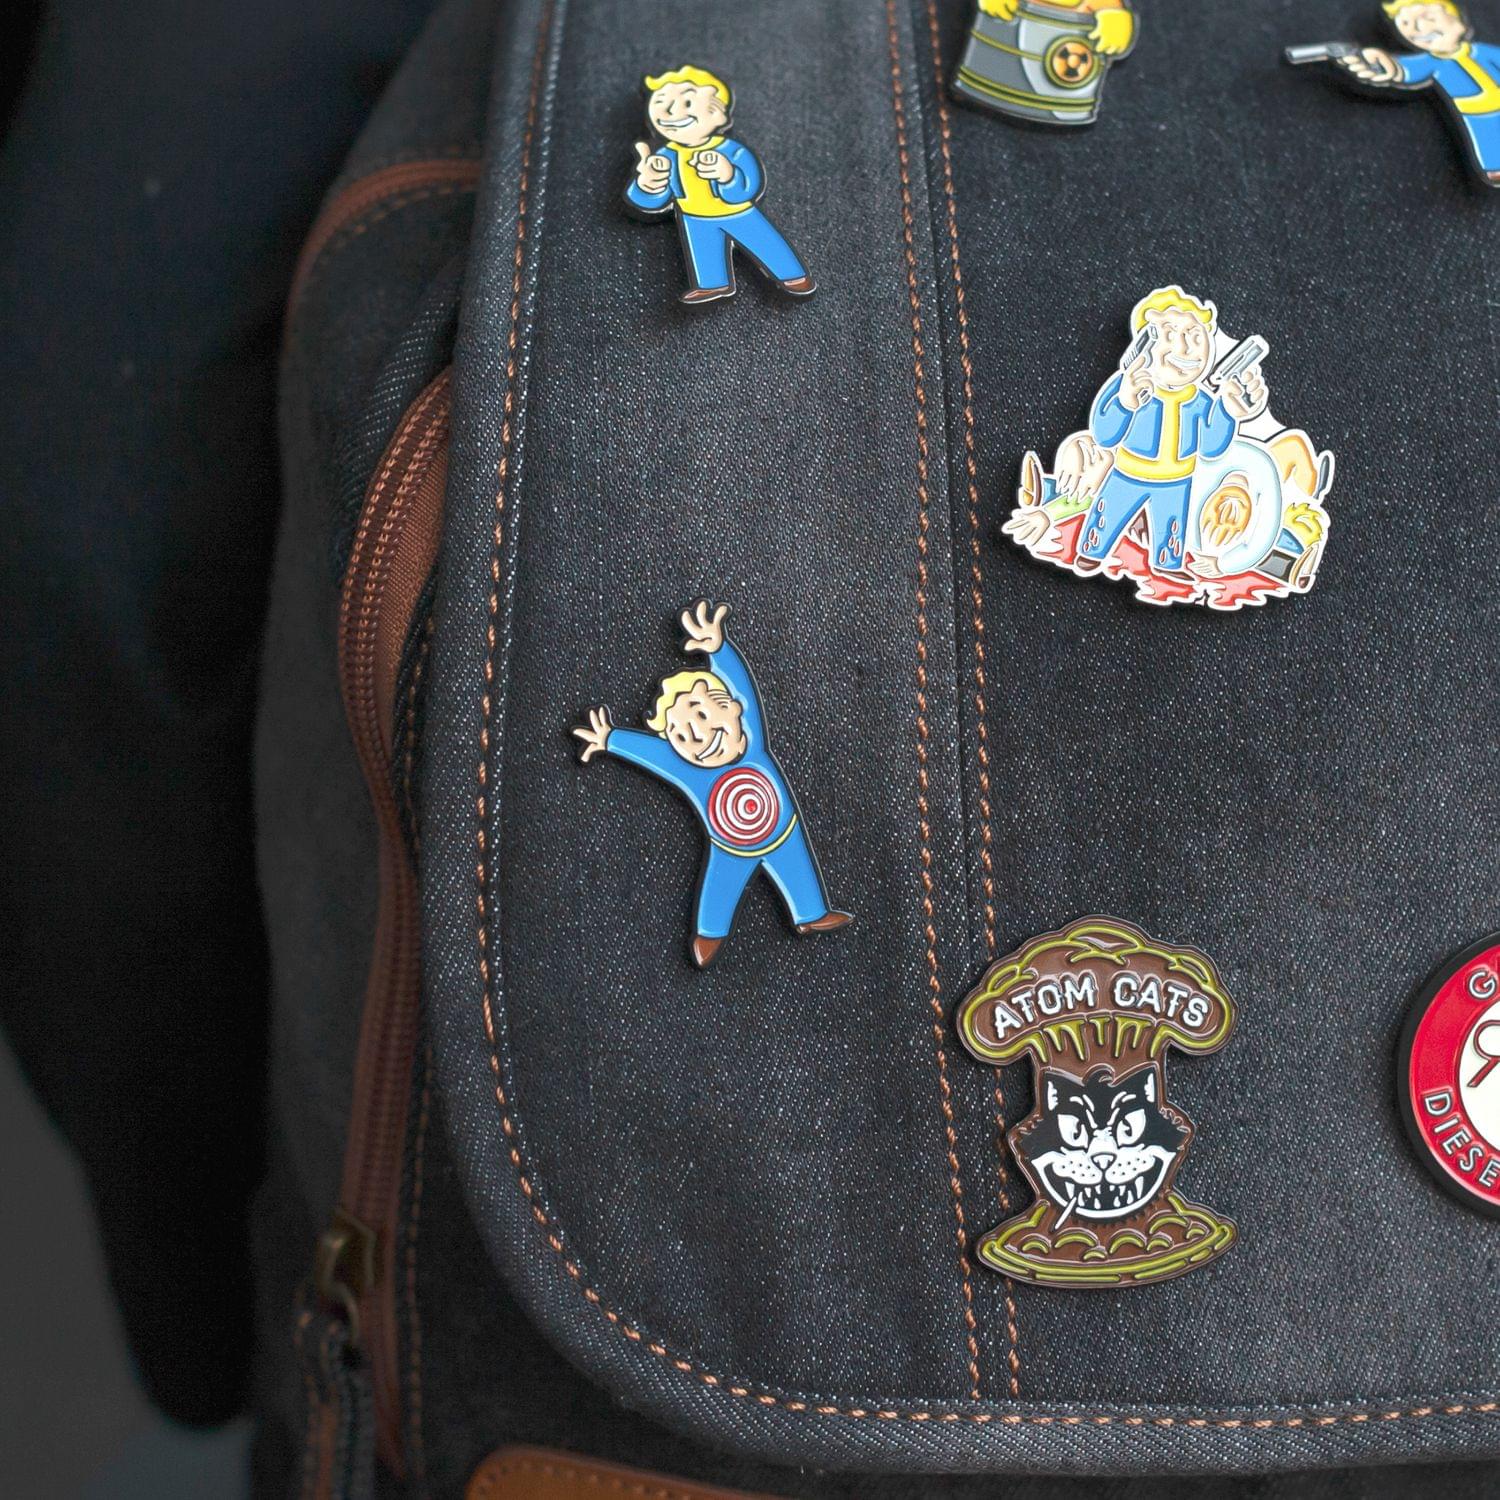 Fallout Collectibles | Vault Boy Collector’s Edition Moving Target Perk Pin